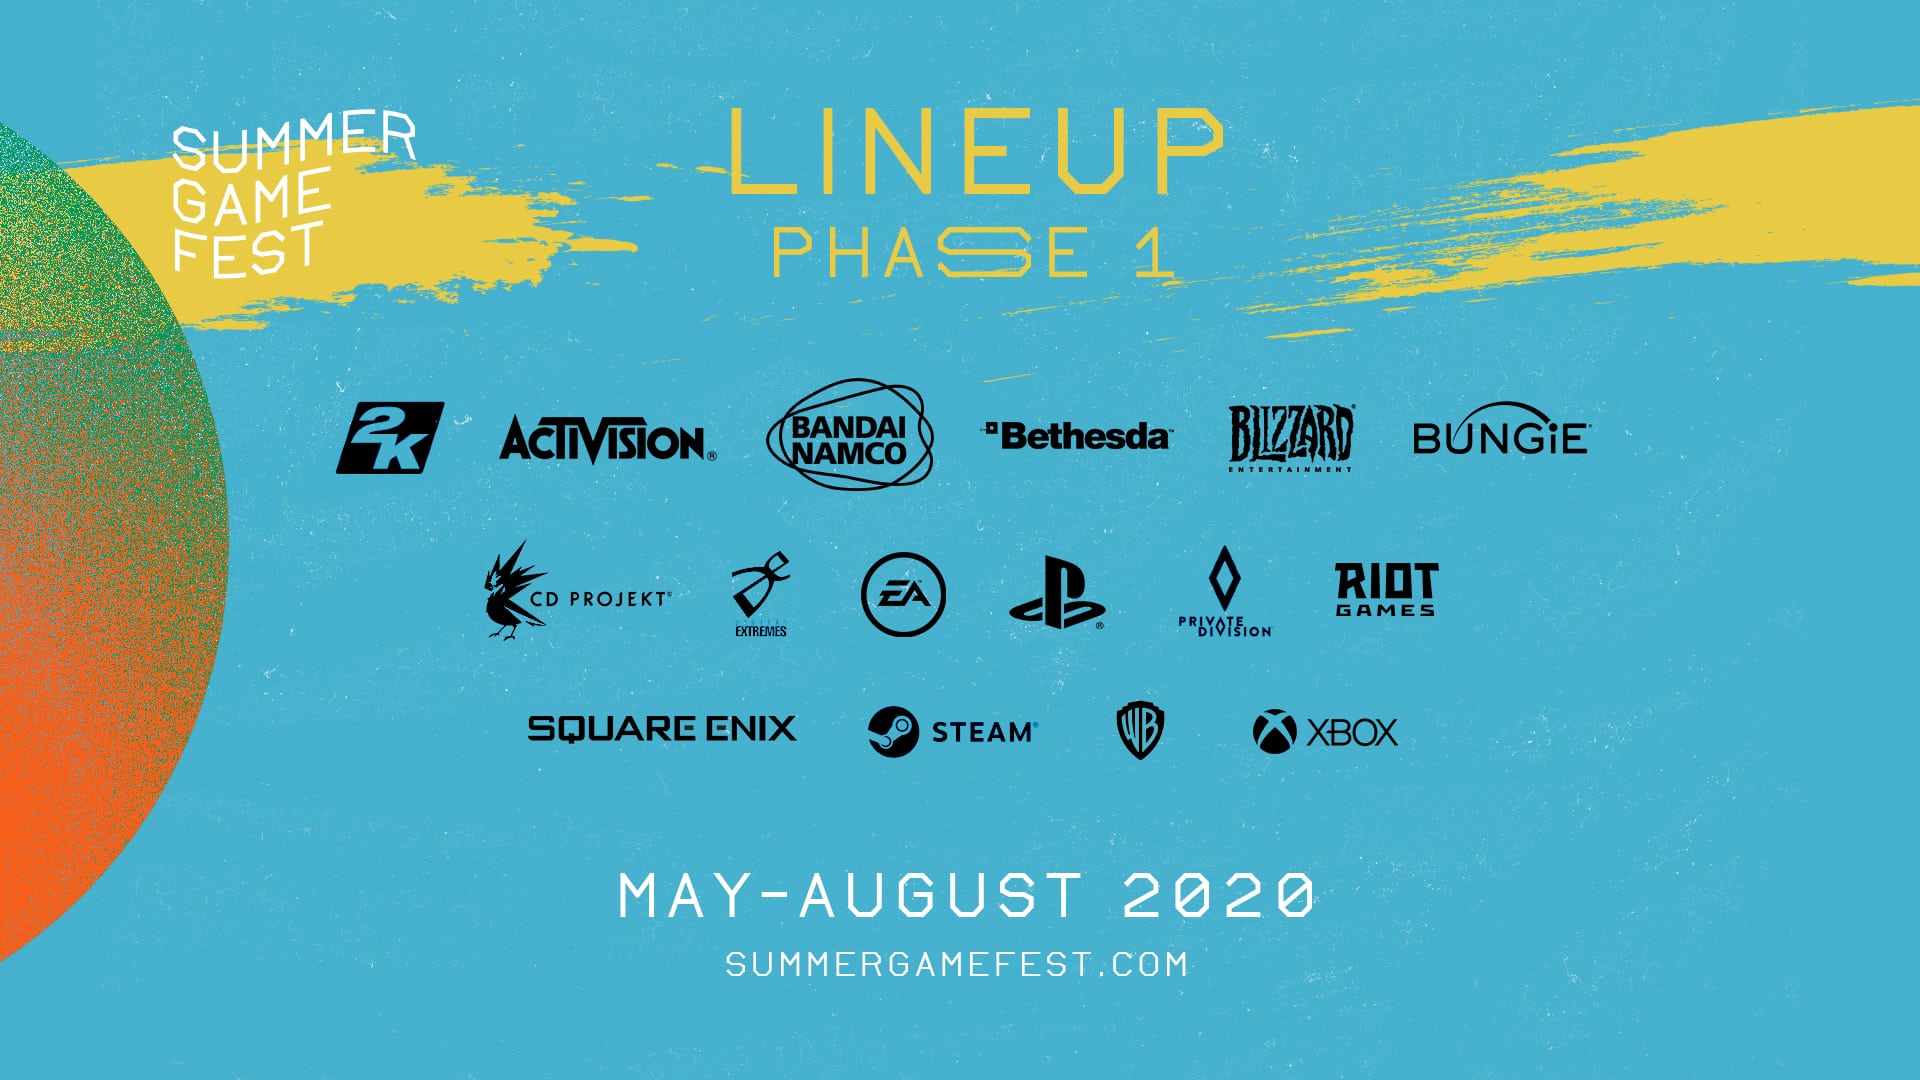 Summer Game Fest Lineup Phase 1